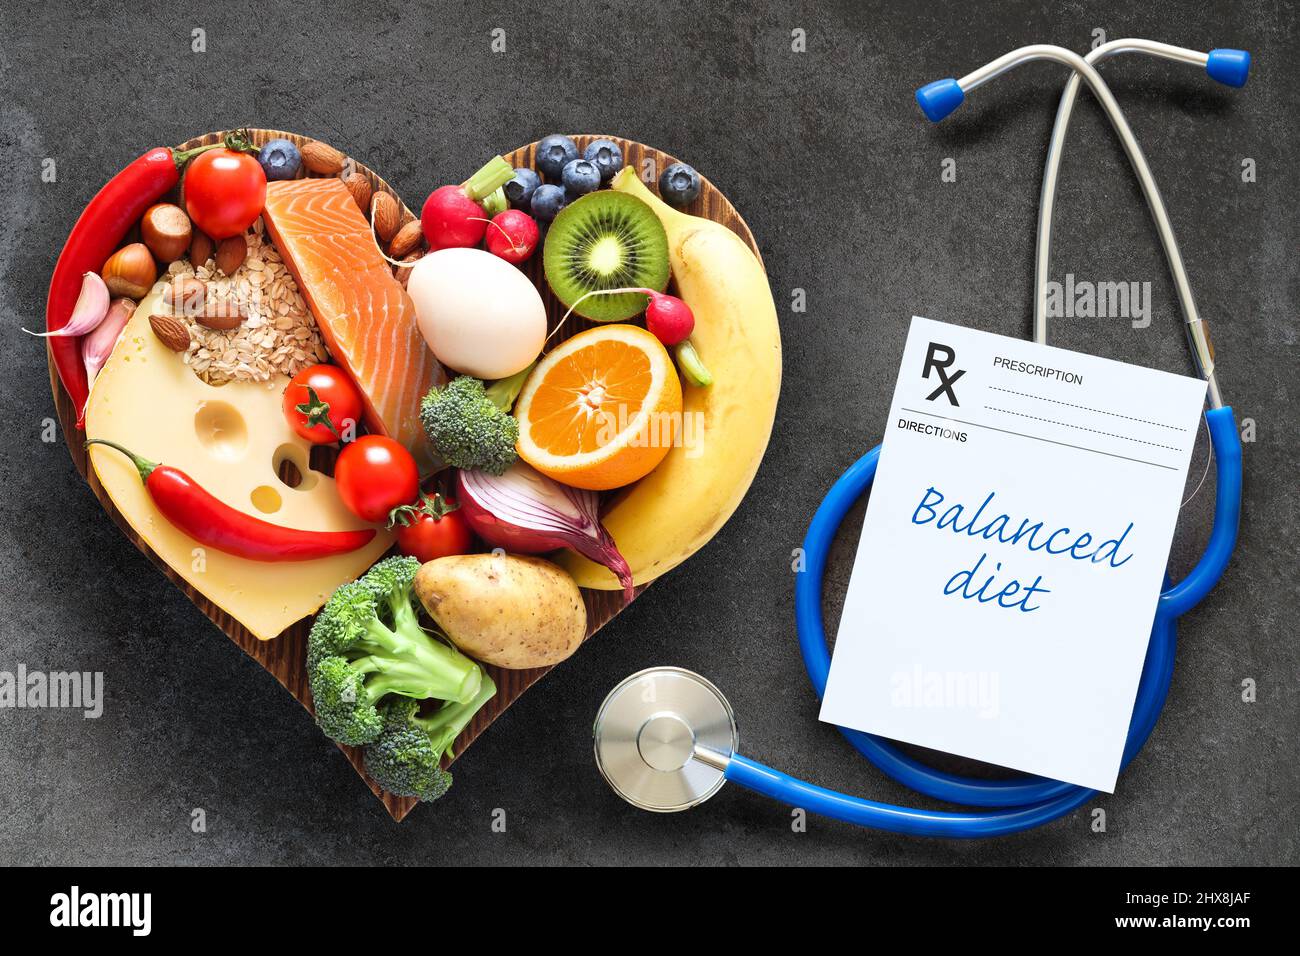 A healthy, balanced diet. Healthy food on a heart-shaped wooden cutting board, stethoscope and prescription. Concept of healthy eating Stock Photo